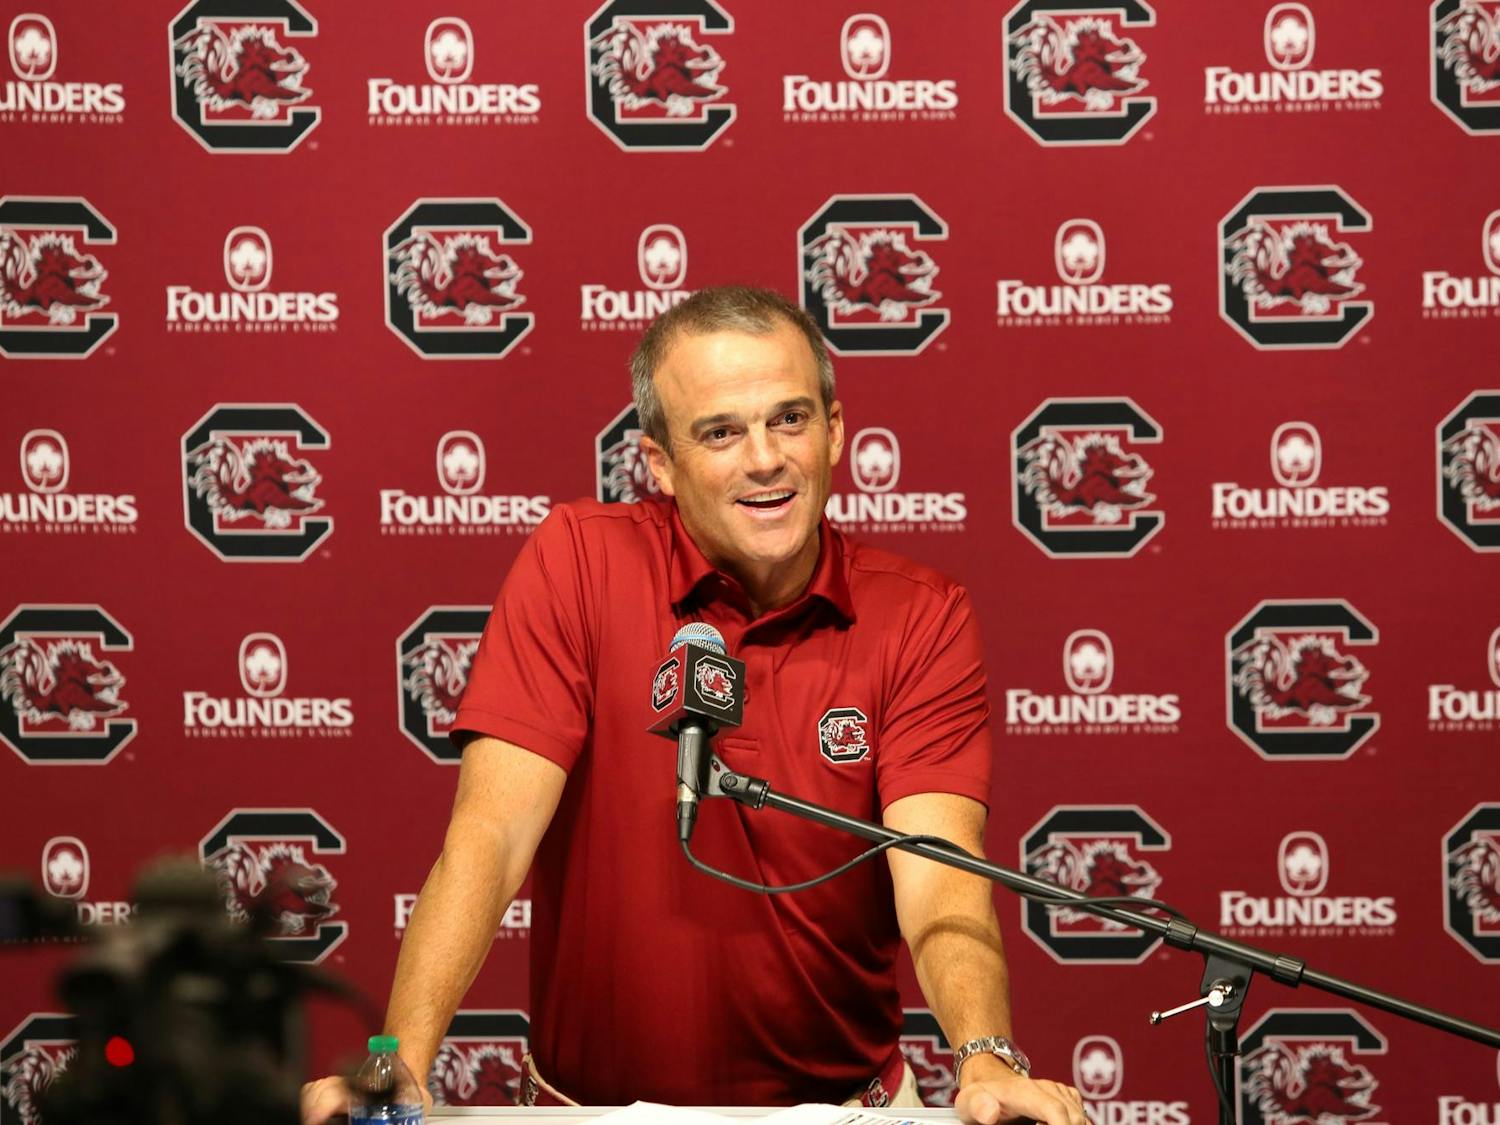 Head coach Shane Beamer reflects on the past weekend's game against the University of North Carolina during the press conference on Sept. 5, 2023. Coach Beamer discussed the team's early season performance and practice attitude ahead of its contest against Furman this weekend.